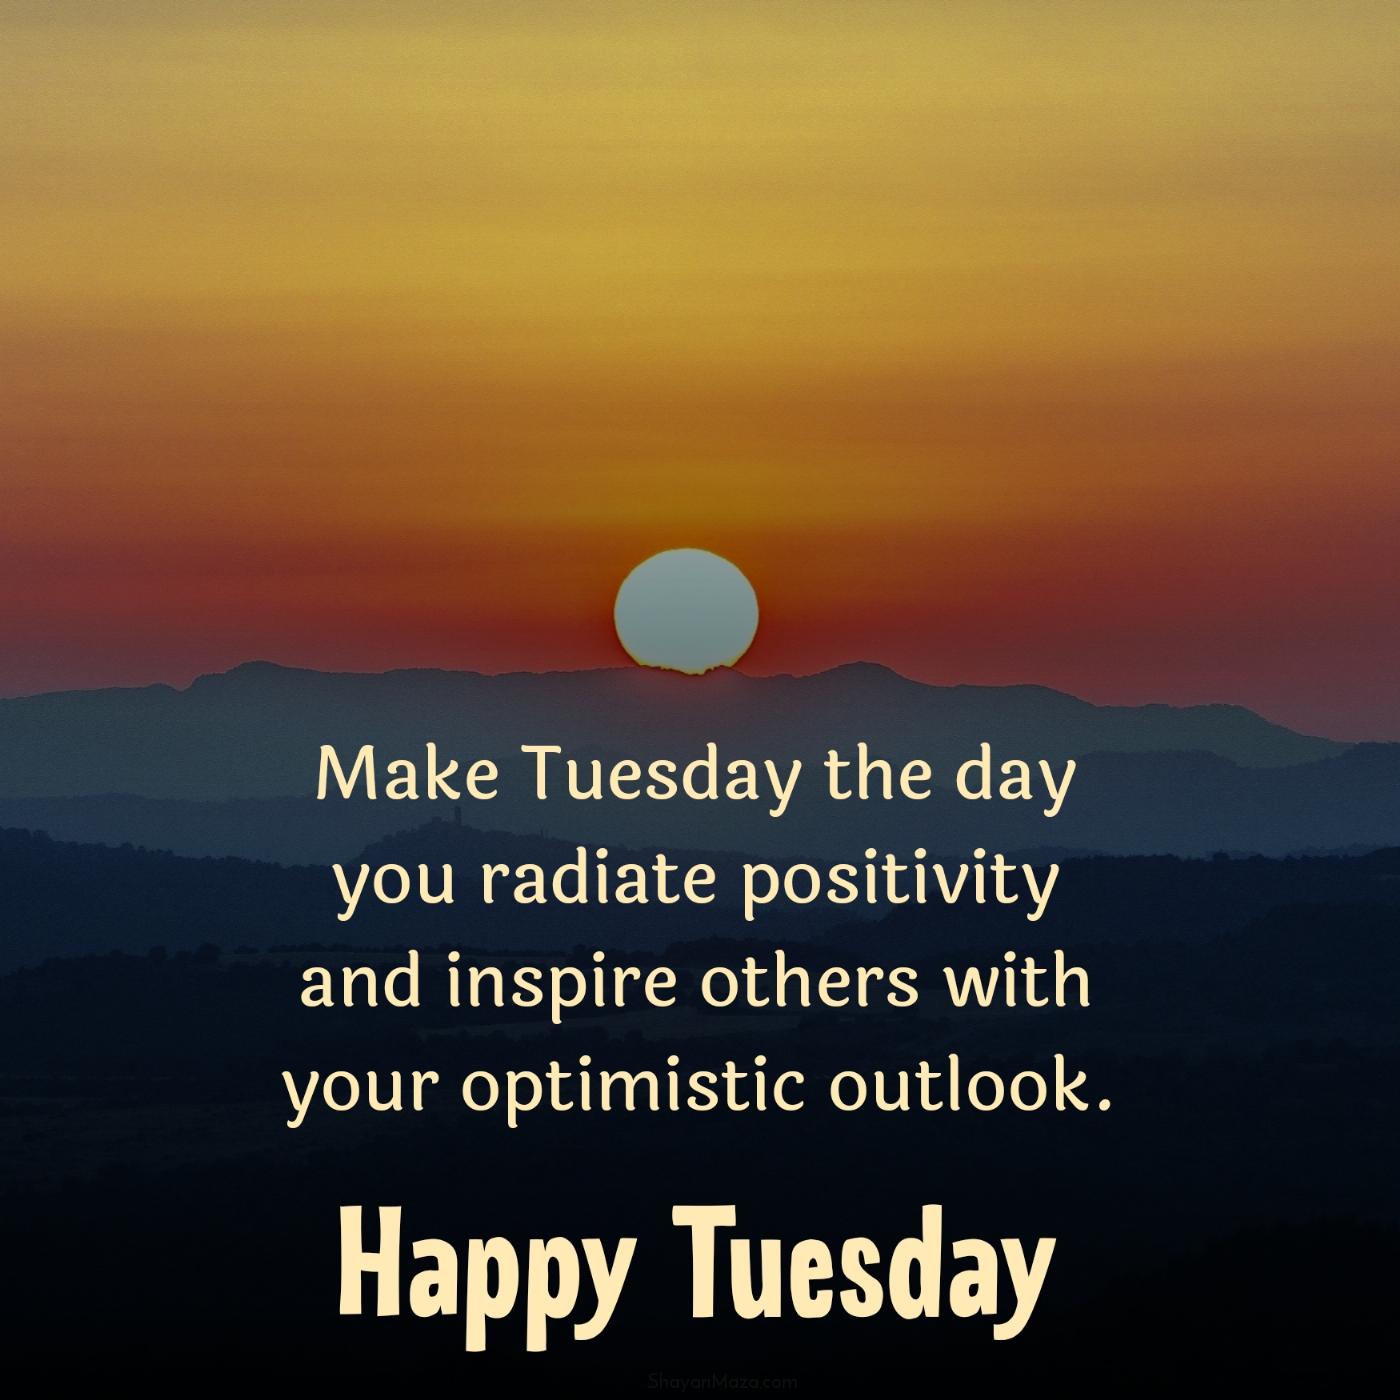 Make Tuesday the day you radiate positivity and inspire others